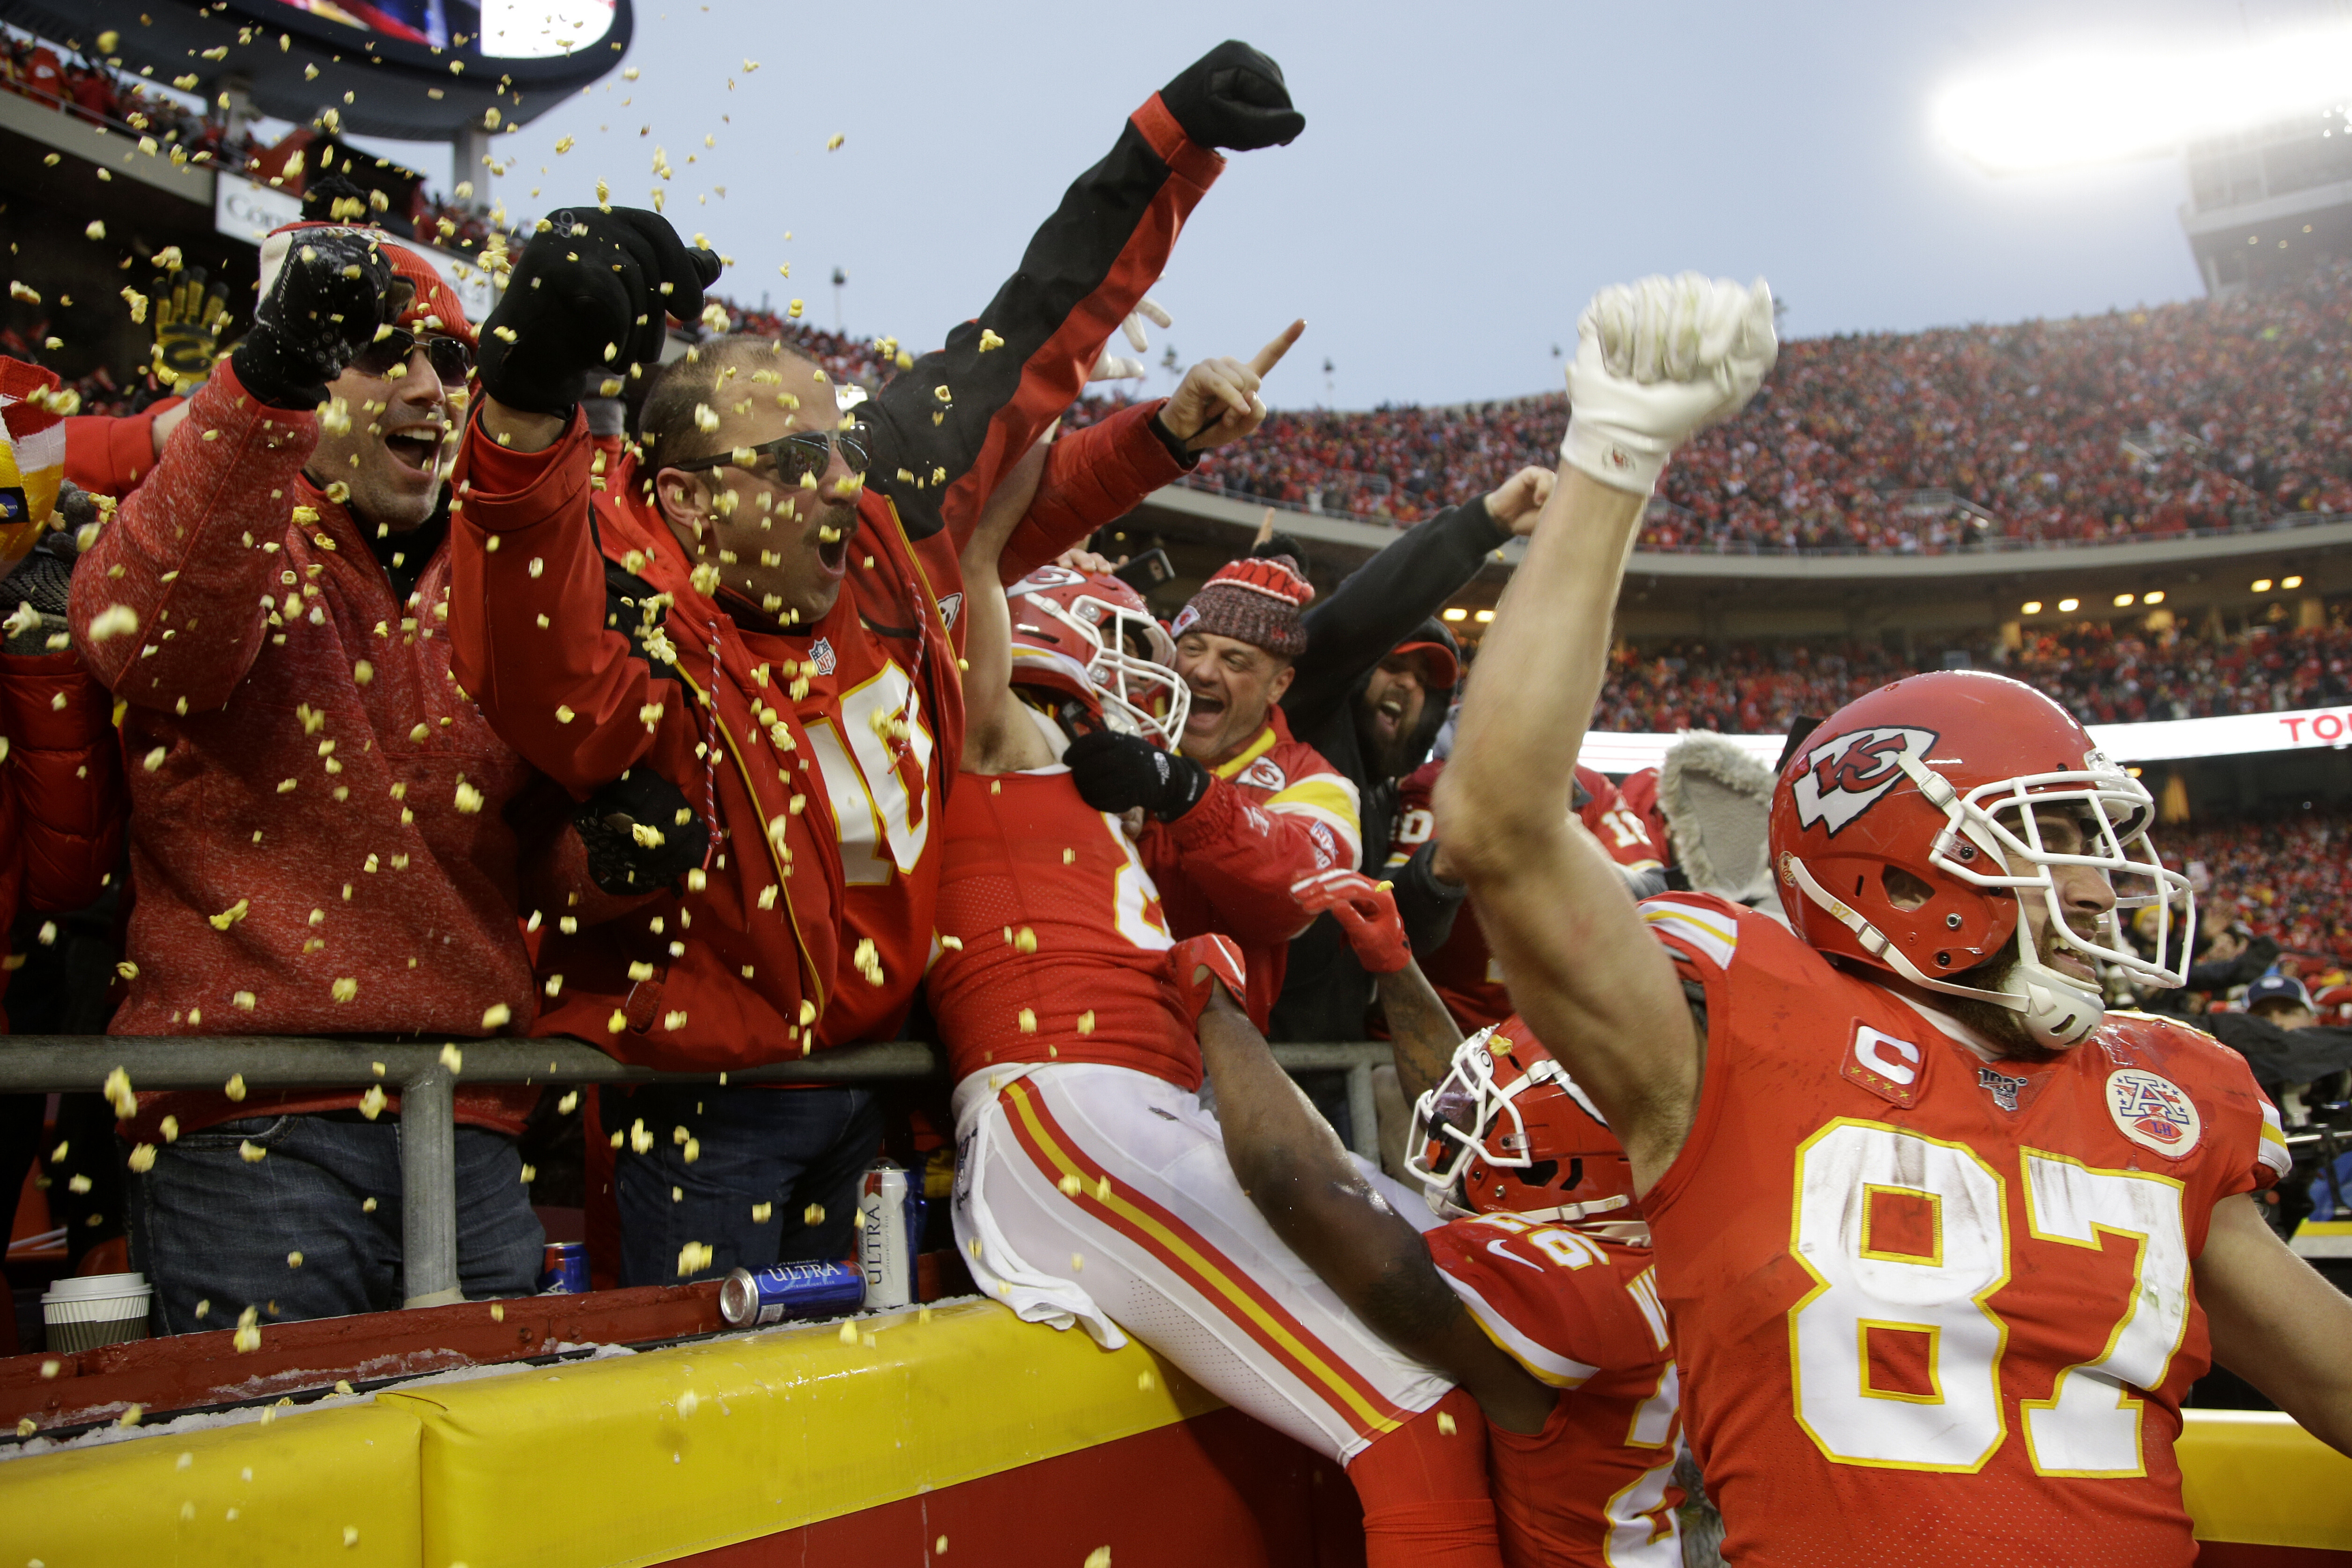 This is a great time to be in Missouri': Chiefs fans celebrate